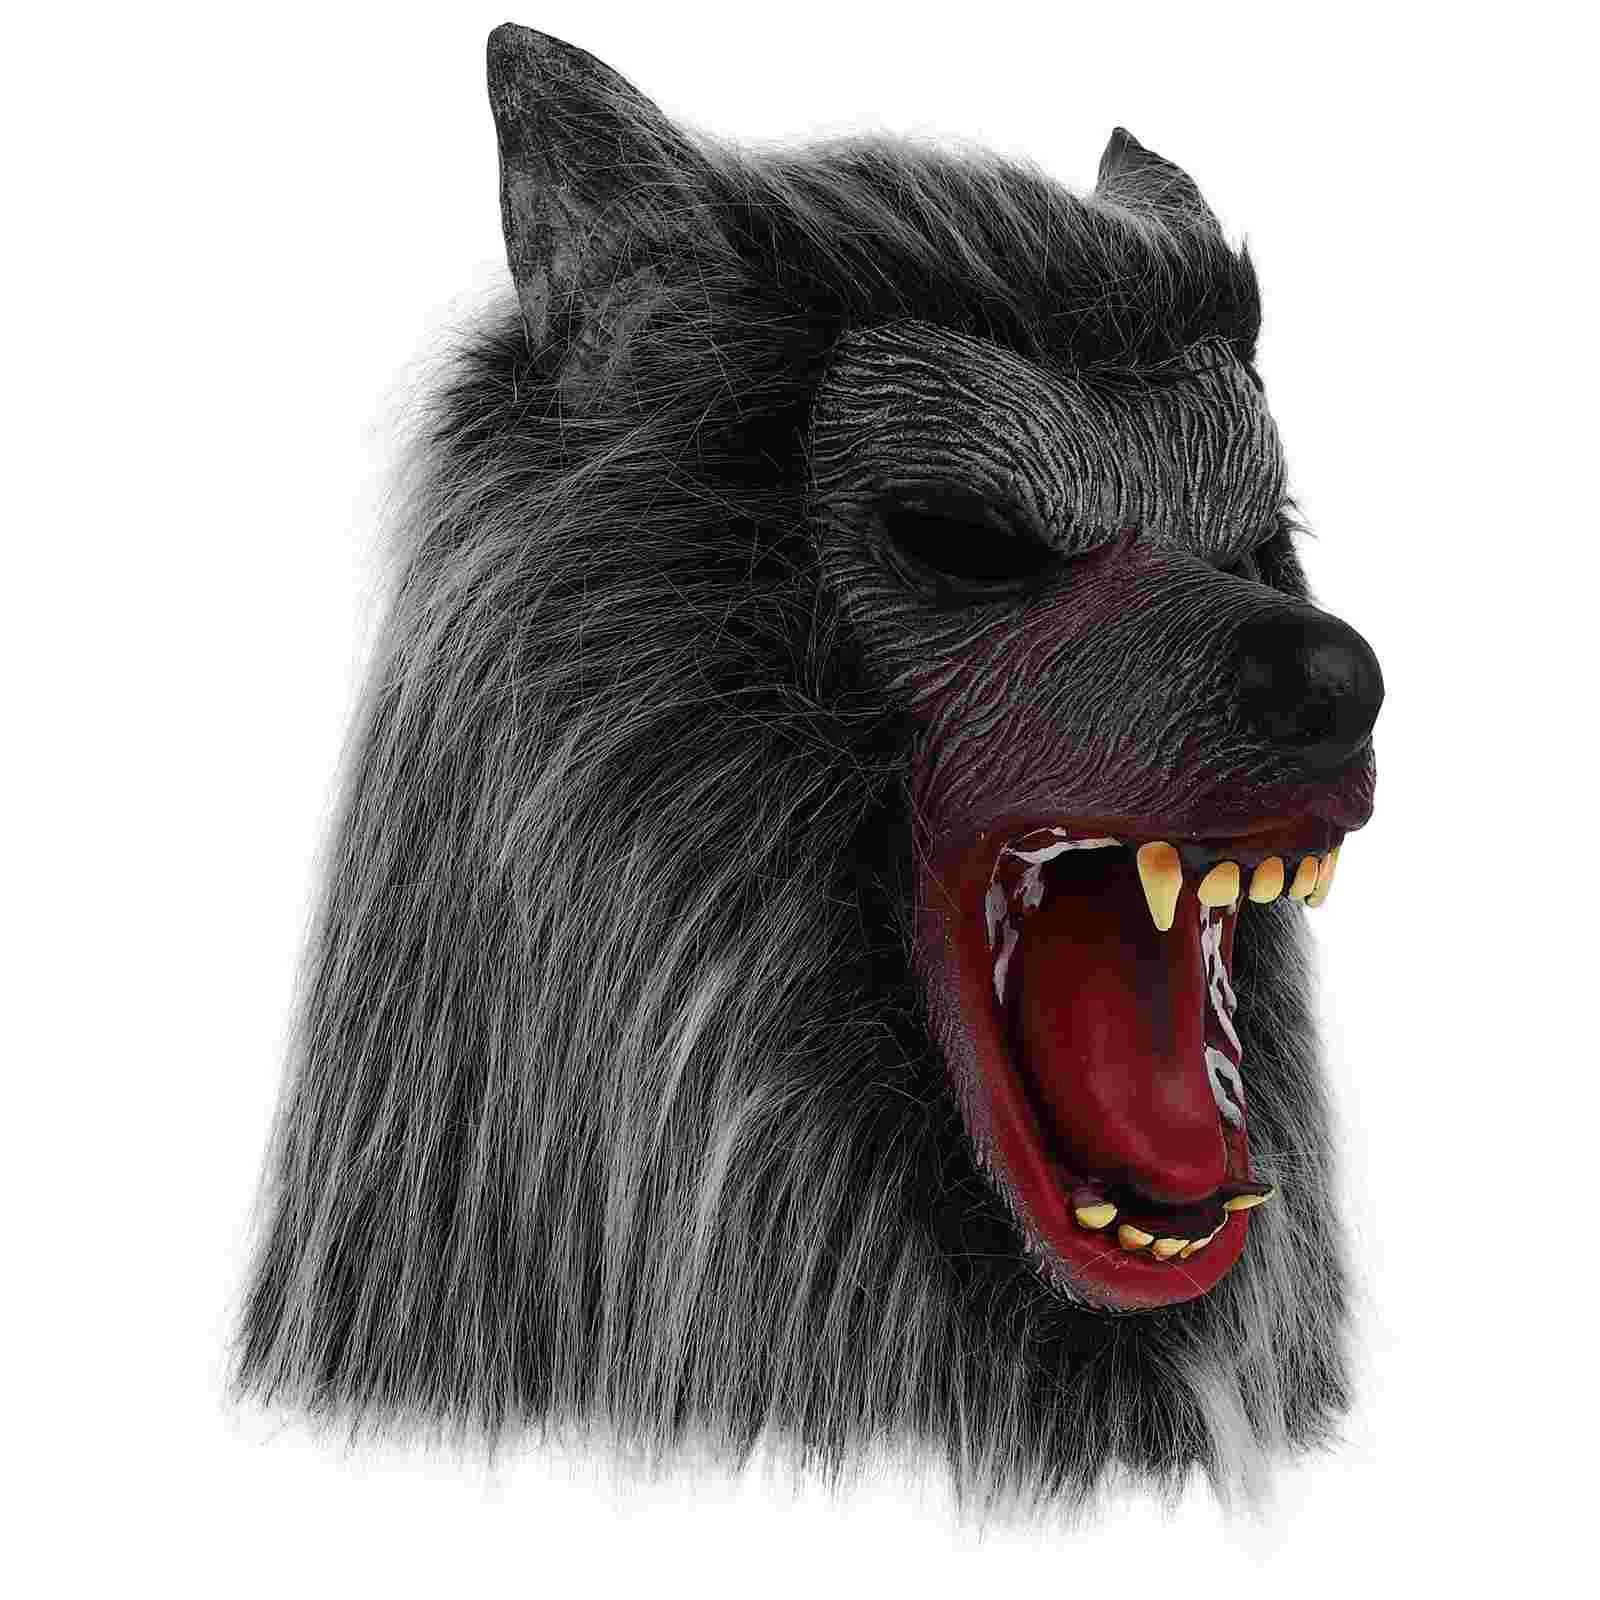 

Latex Halloween Mask Scary Wolf Decoration Eye-catching Horrific Face Masquerade Cosplay Costume